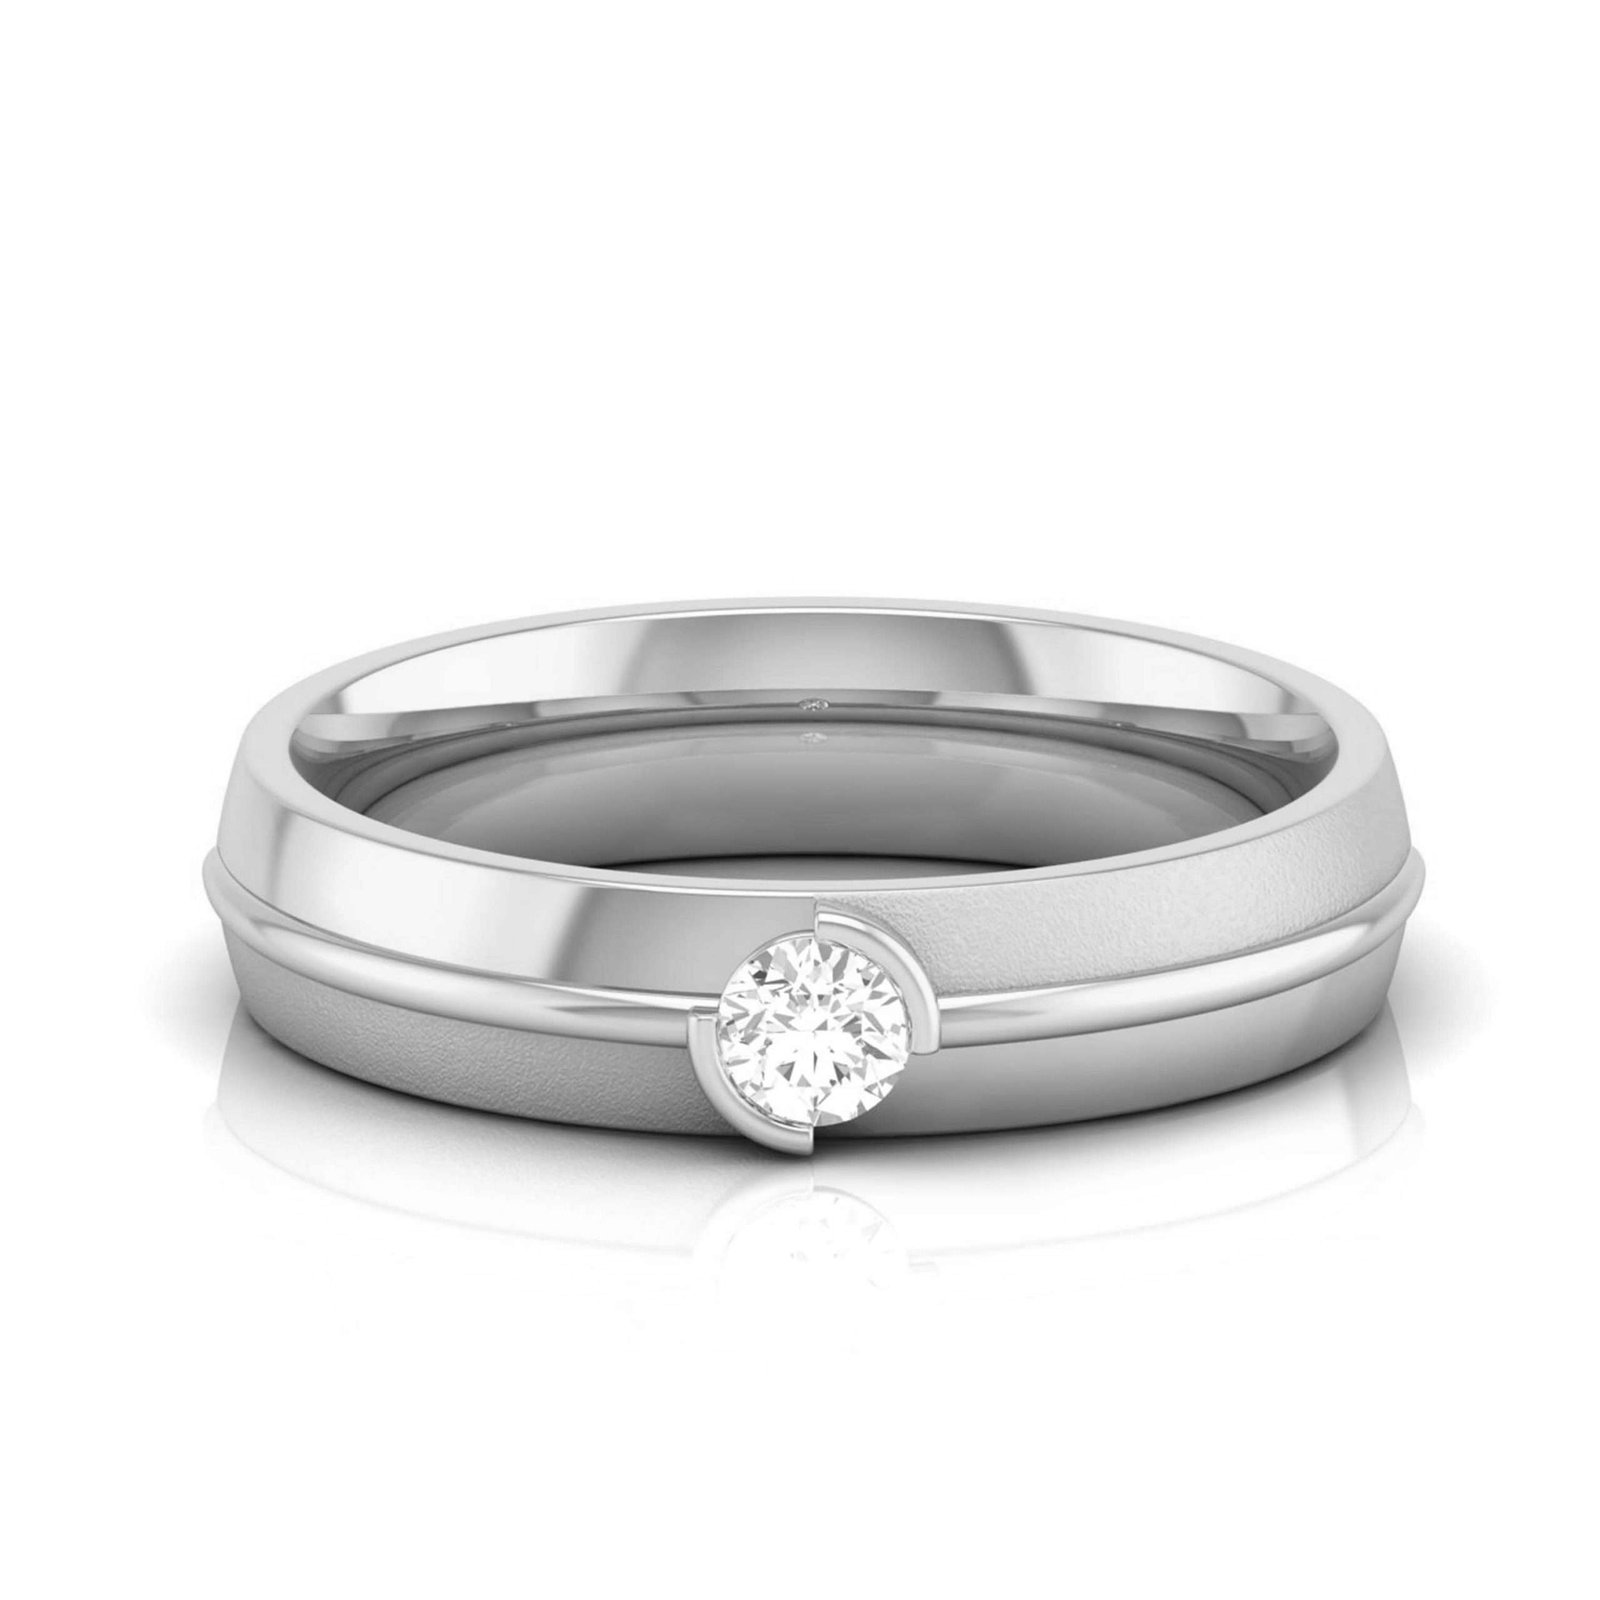 Admirable Men's Diamond Ring | Best choice for Father's Day – Arya Jewel  House